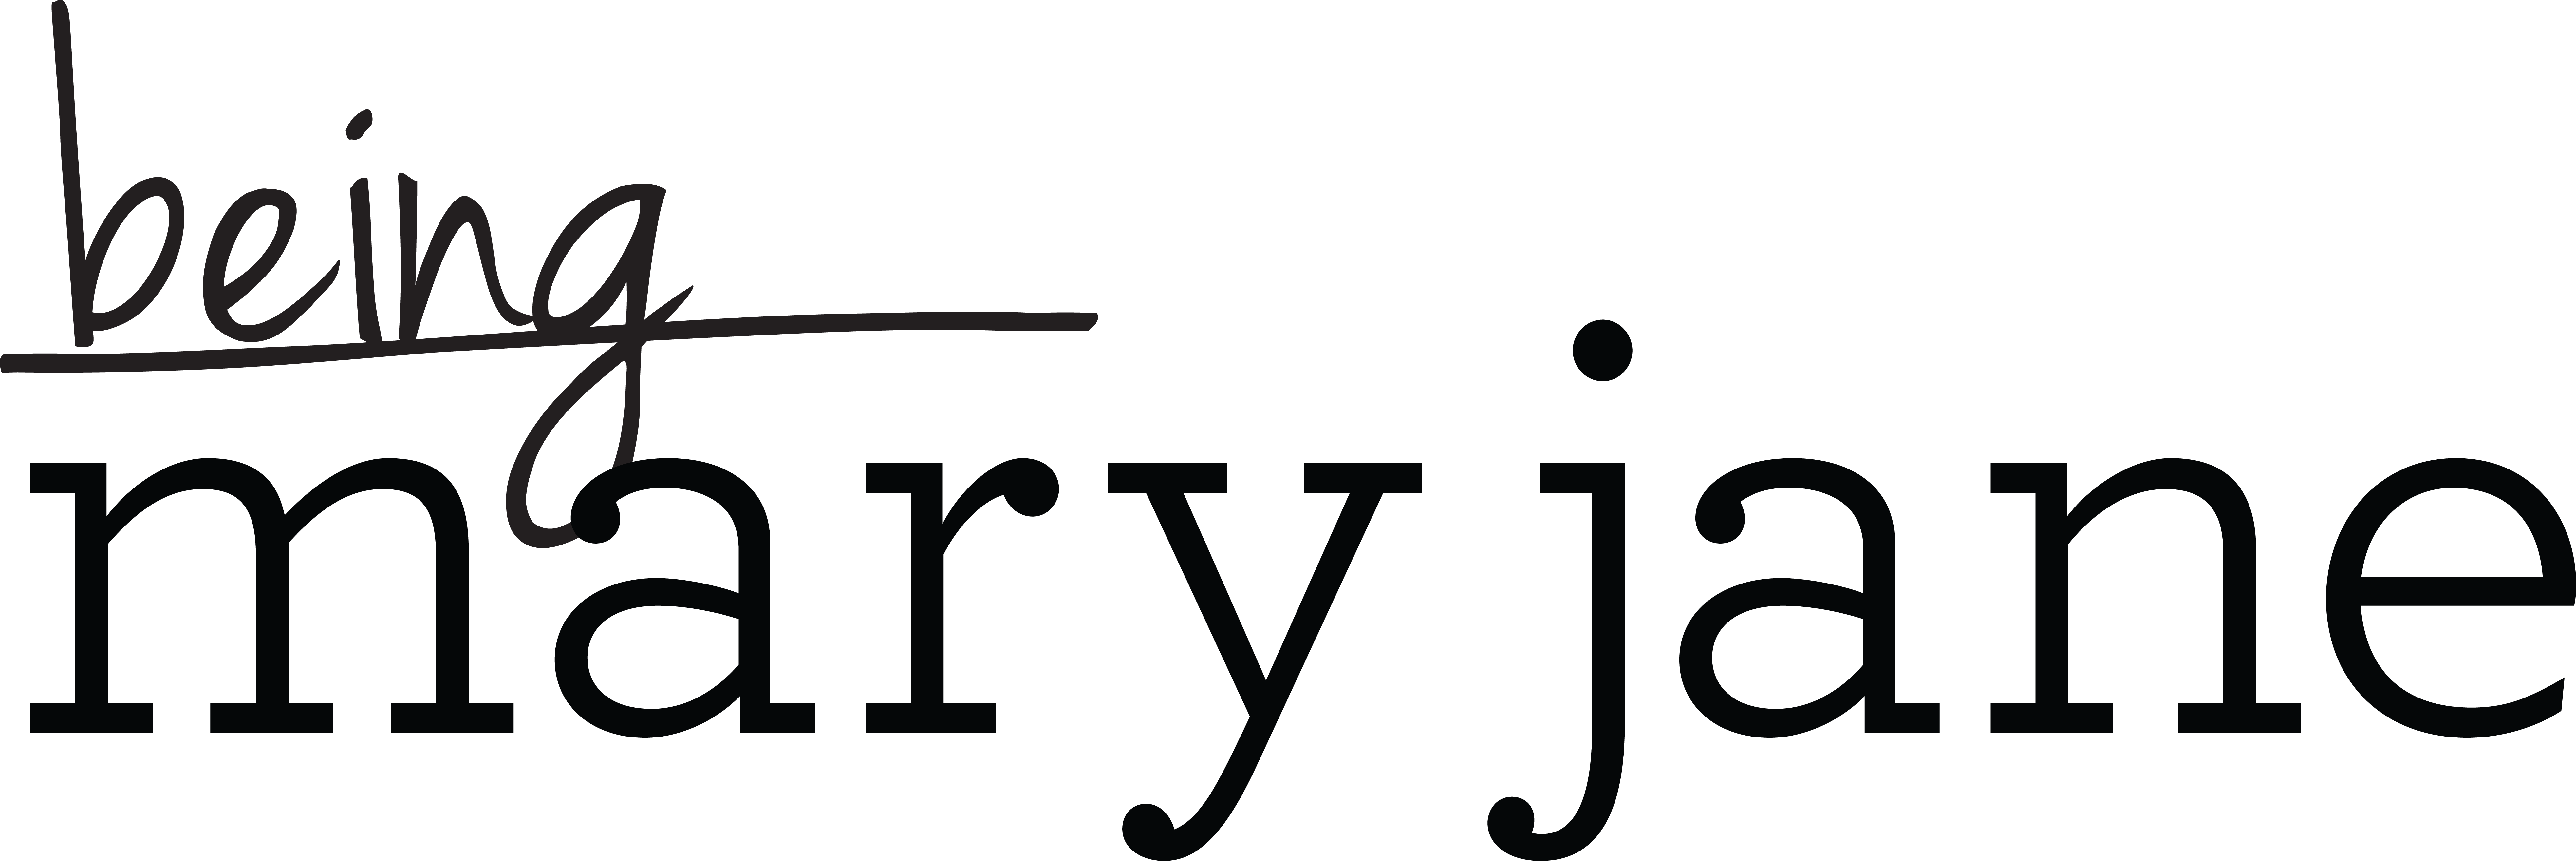 Jane Logo - File:Being Mary Jane logo.png - Wikimedia Commons